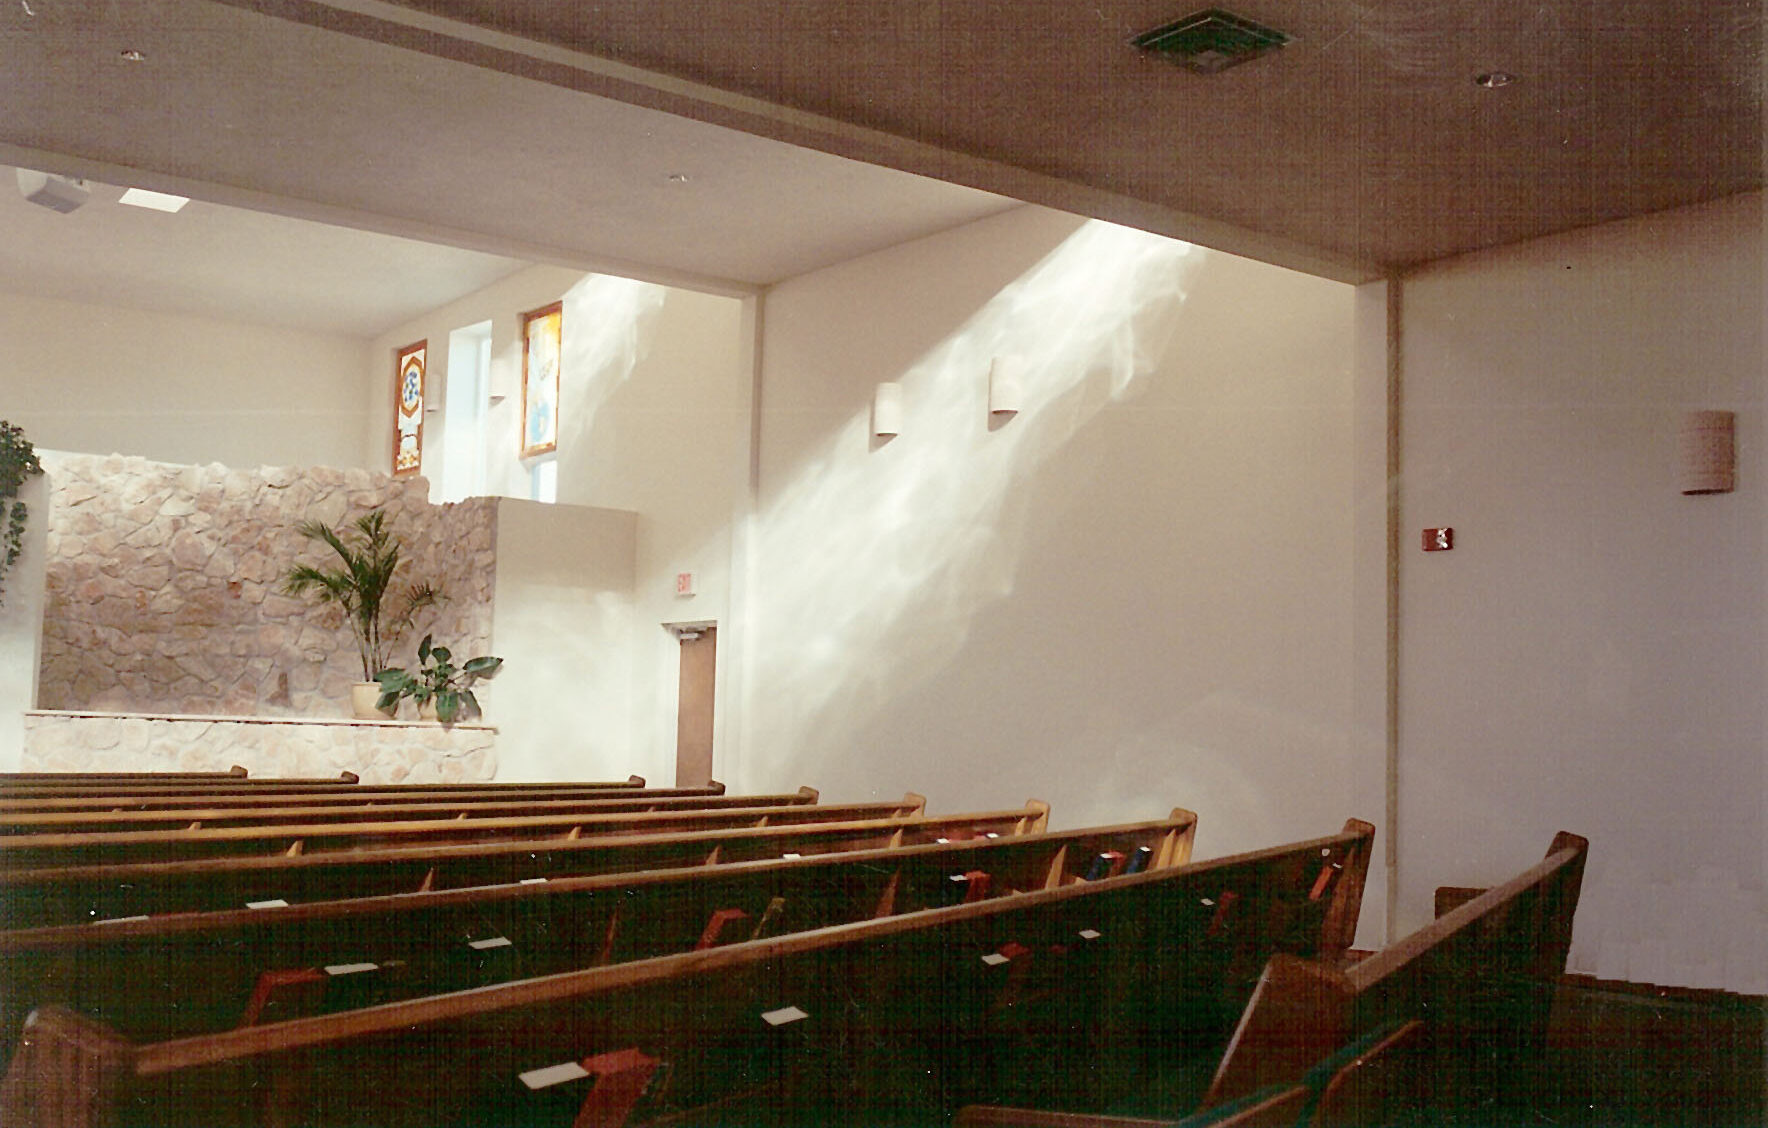 Light gently sifts down from clerestories; the pews are arranged so that churchgoers can see one another